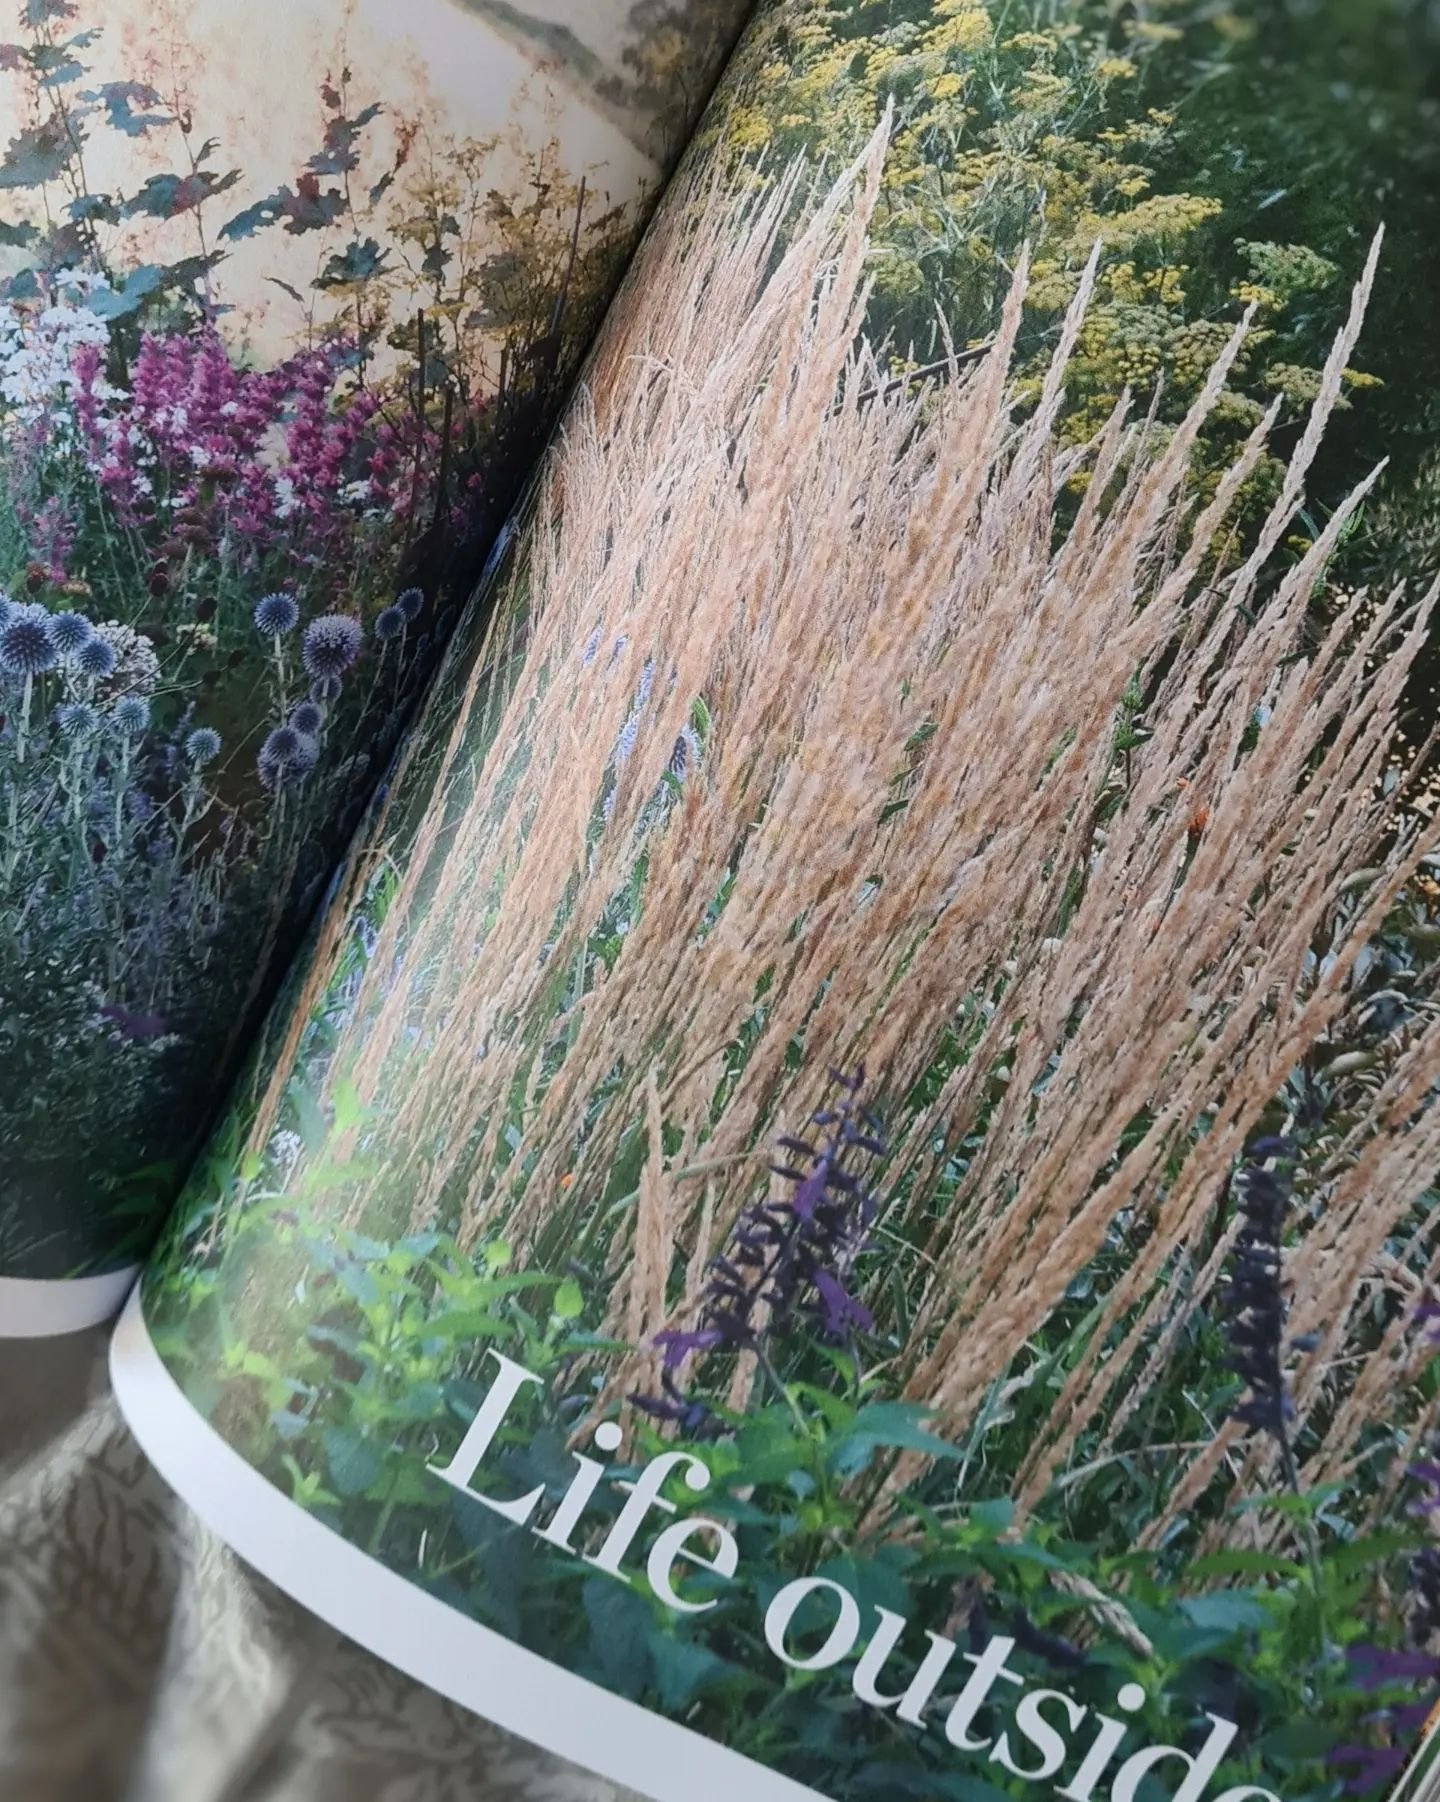 Habitus is a beautiful magazine, so it's such a pleasure to have contributed a little bit of home, and a few thoughts about the role of gardens in our lives to the current issue - not to mention humbled to share the pages with the fabulous @svalbe.co